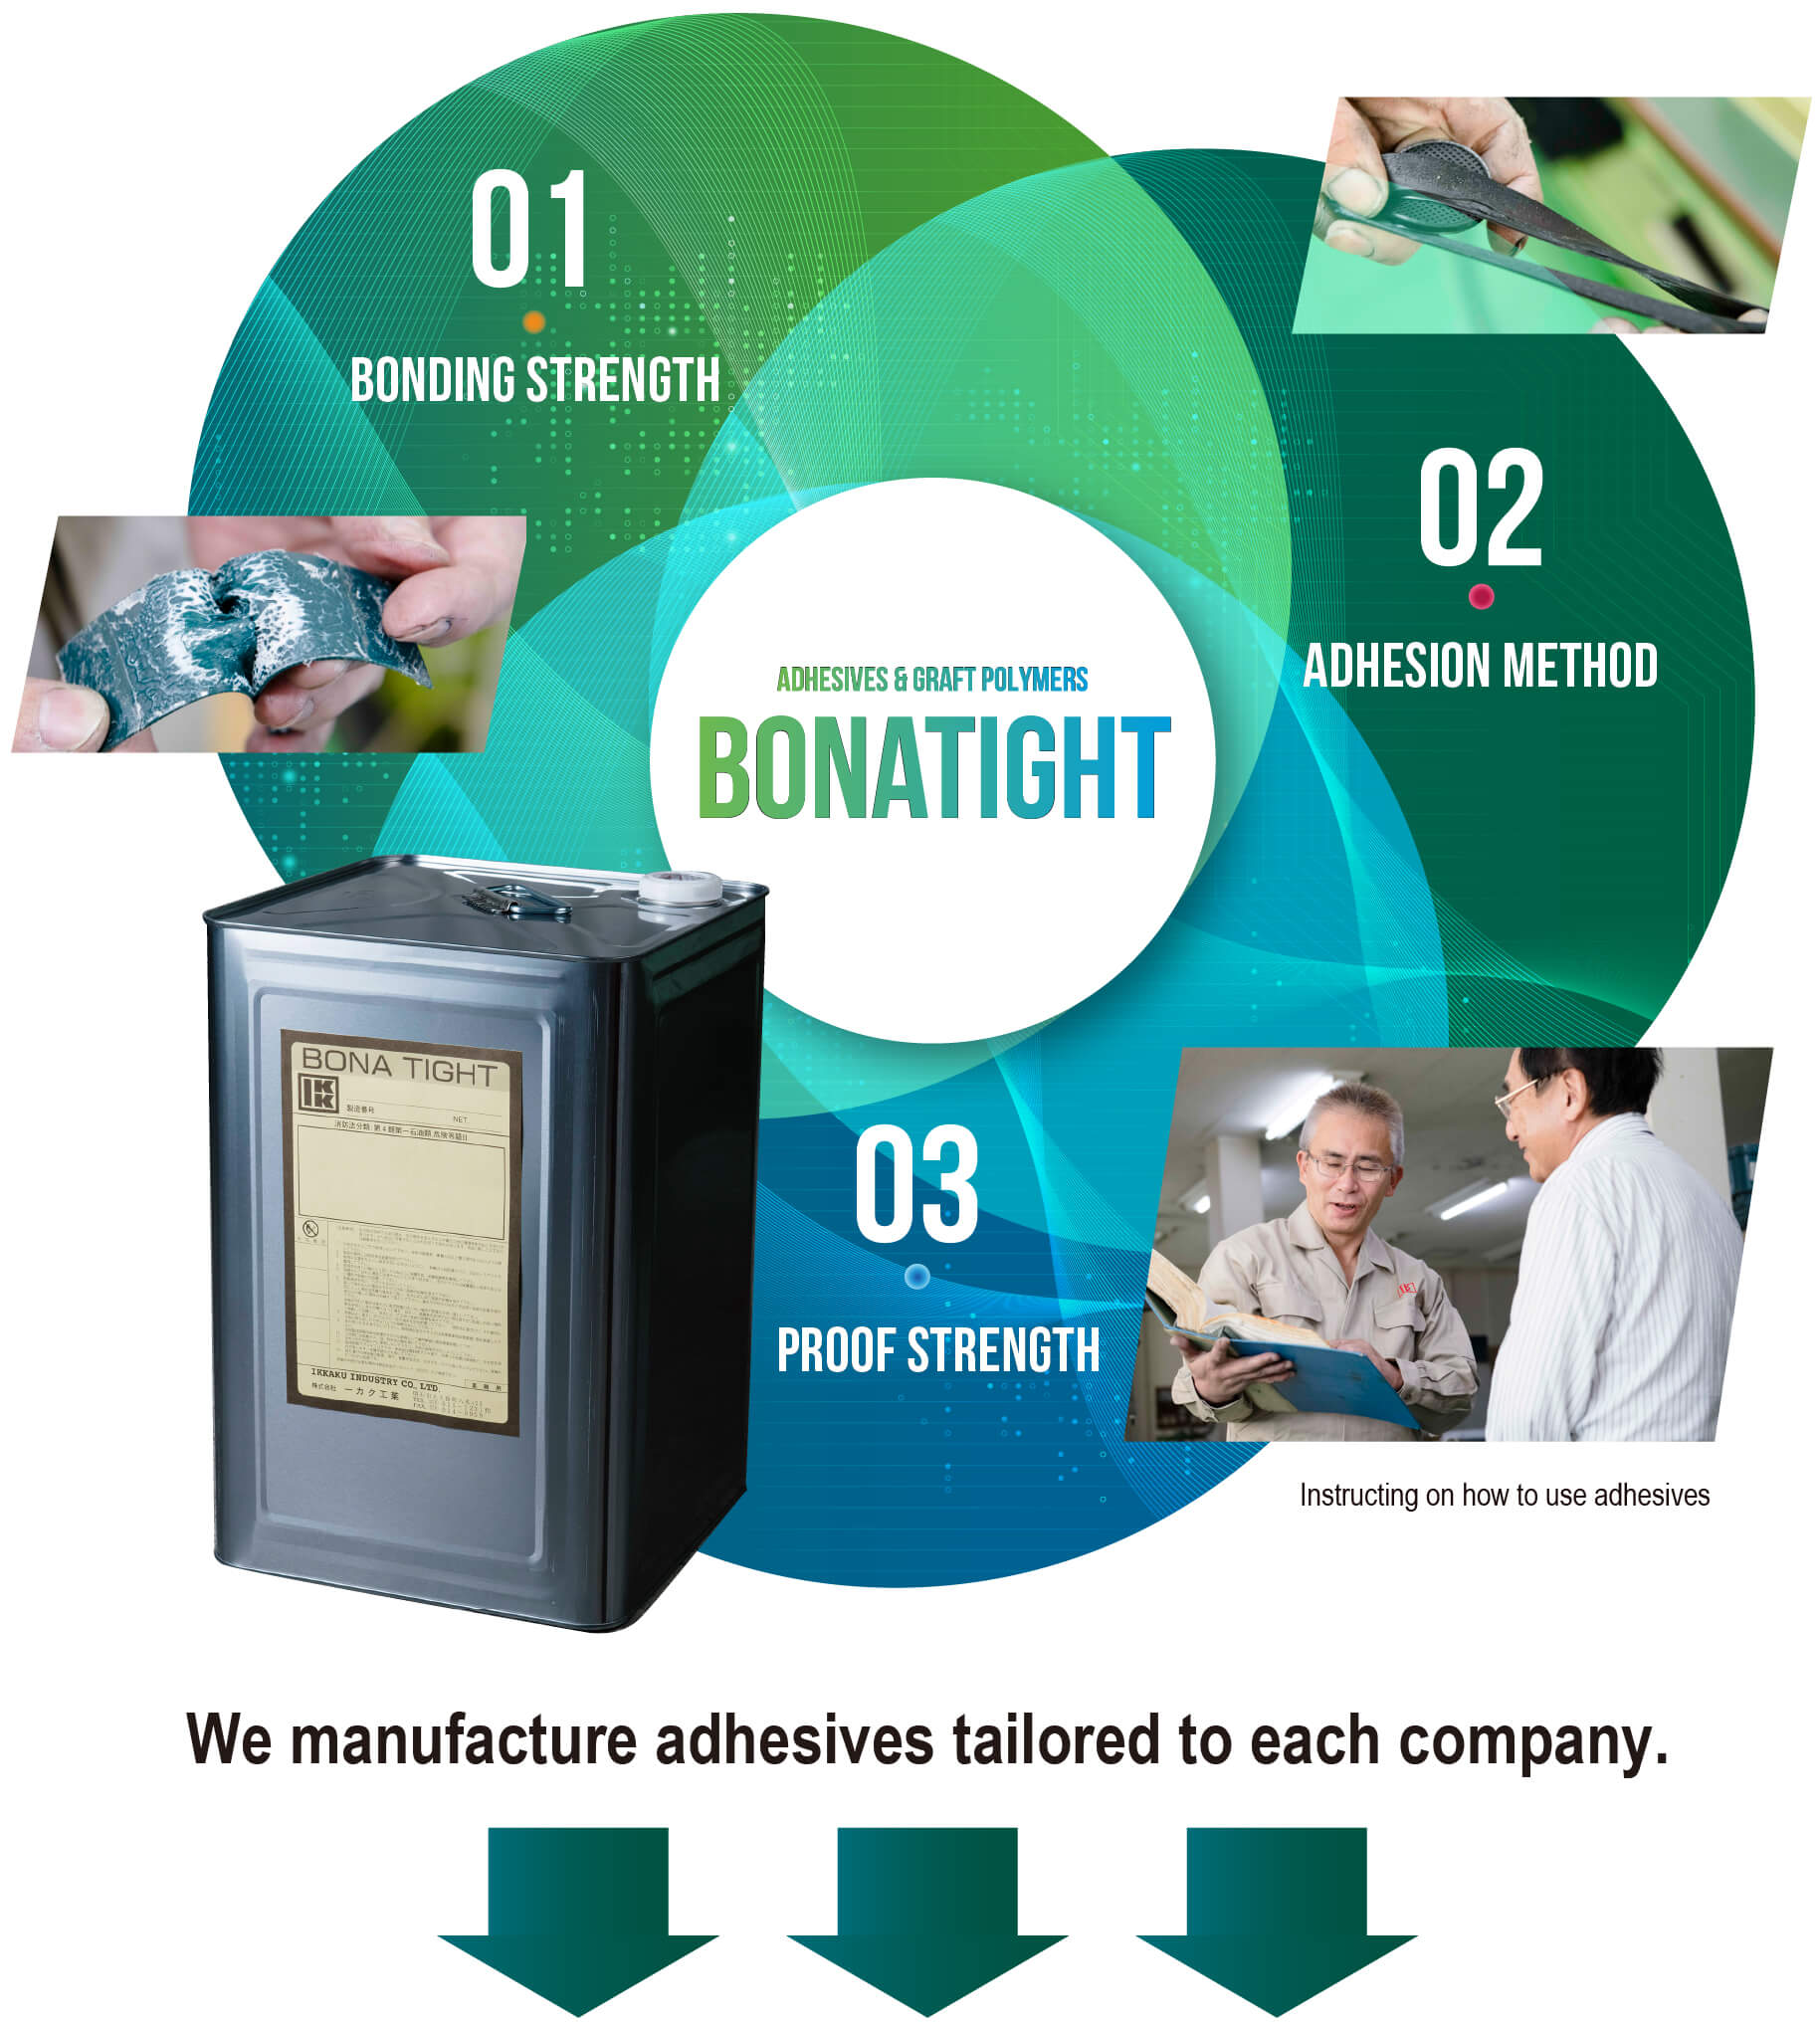 We manufacture adhesives tailored to each company and field.